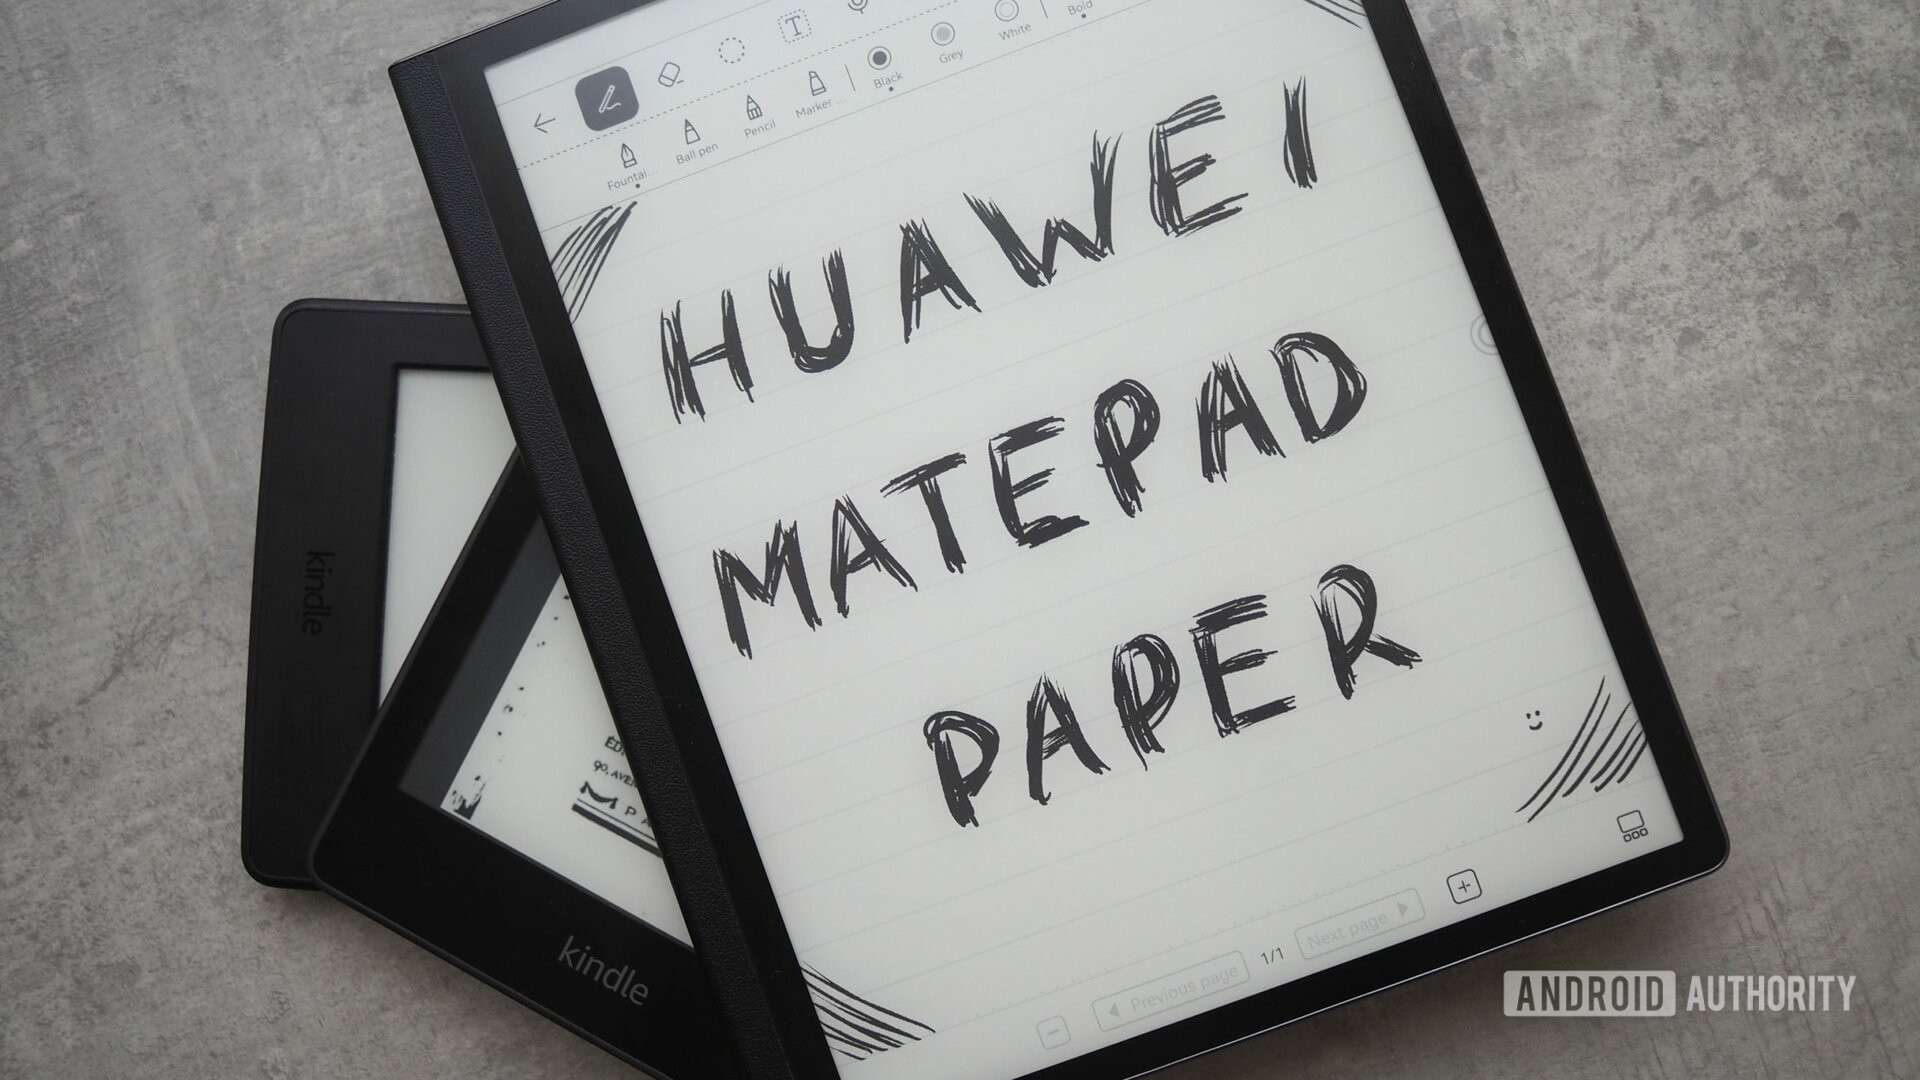 Huawei's Matepad Paper convinced me that e-ink and Android aren't a good fit